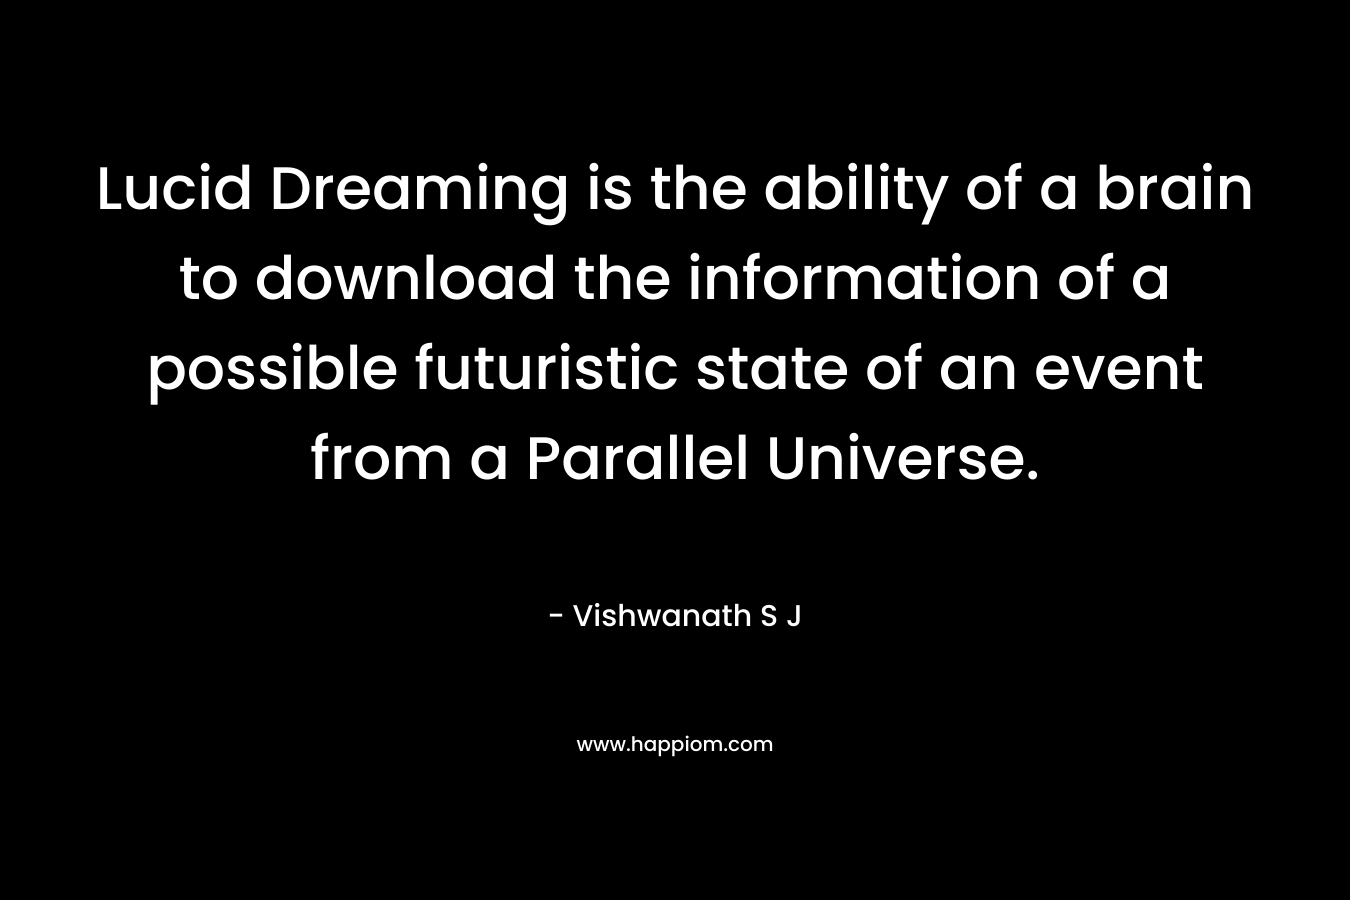 Lucid Dreaming is the ability of a brain to download the information of a possible futuristic state of an event from a Parallel Universe. – Vishwanath S J